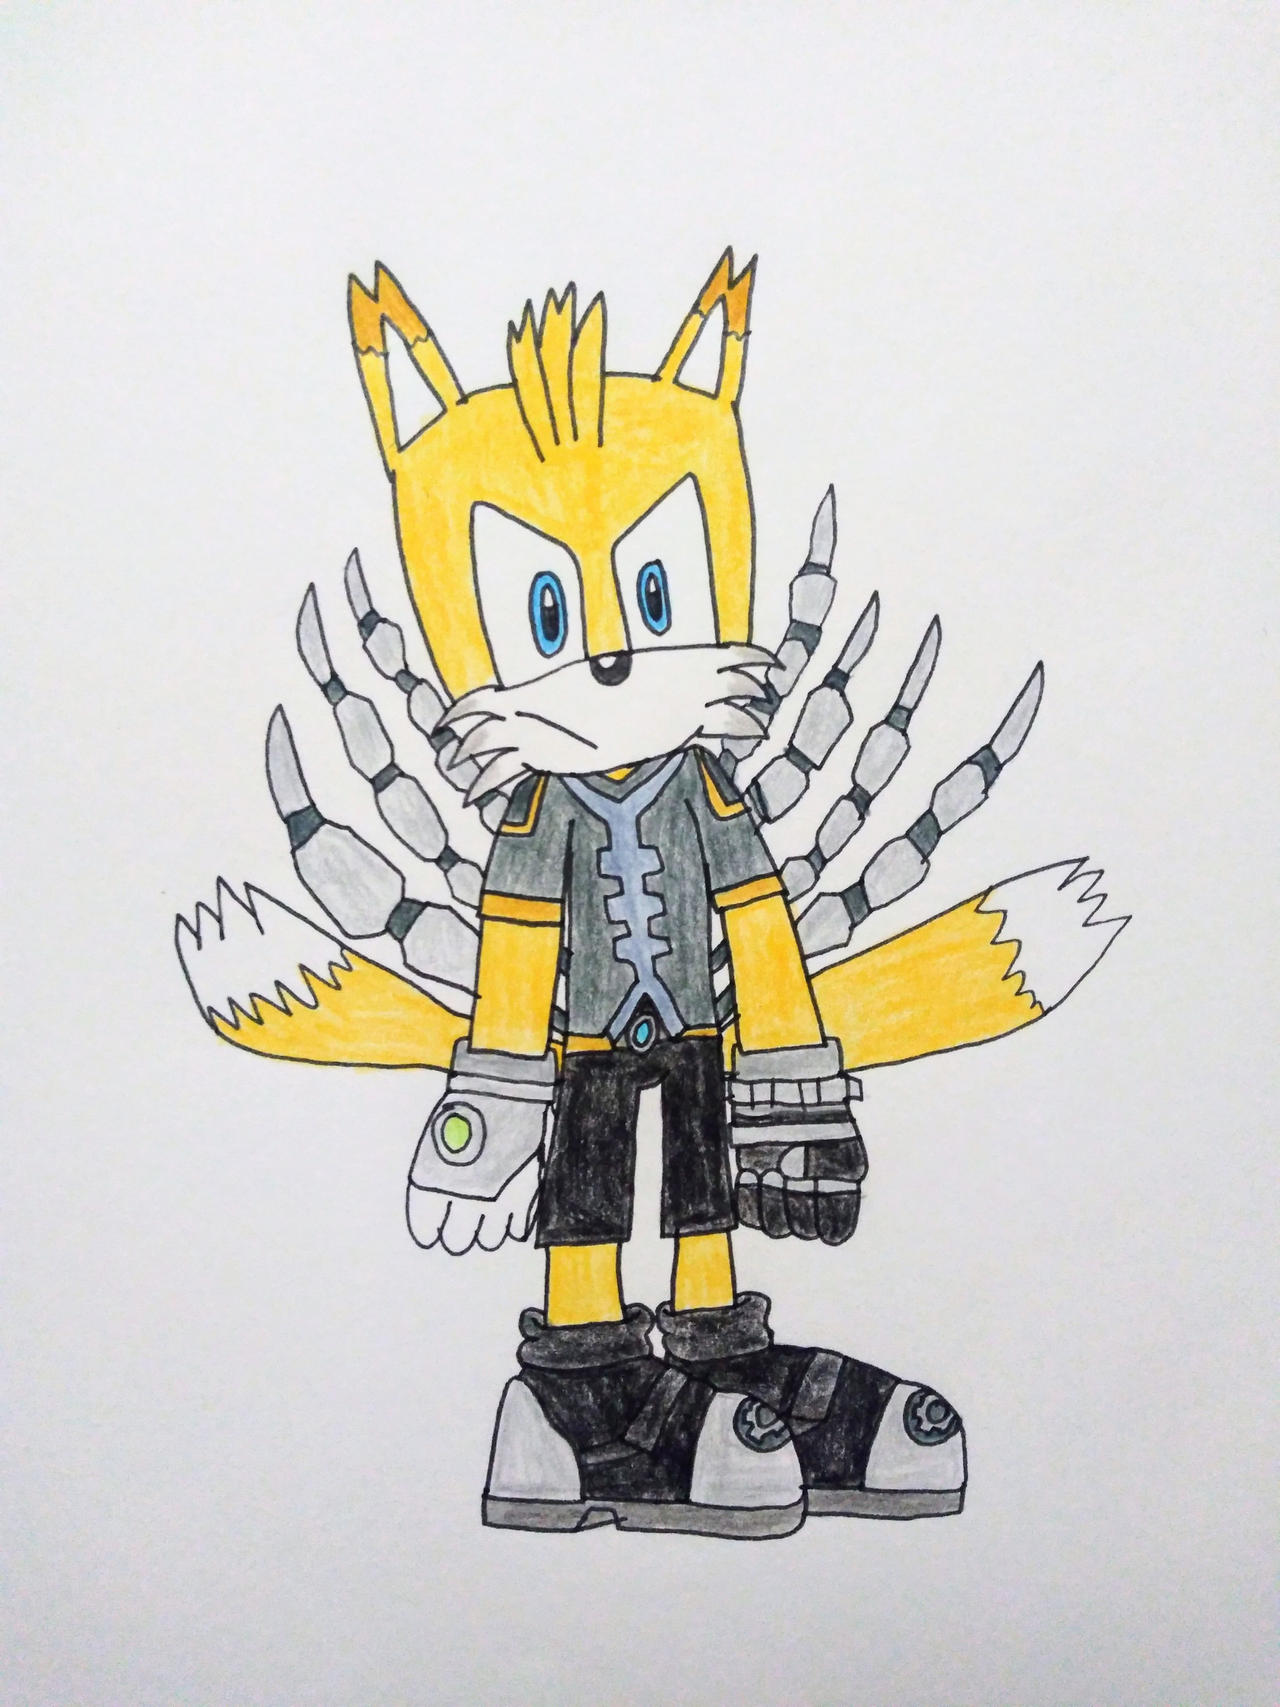 Angry Super Tails by S213413 on DeviantArt